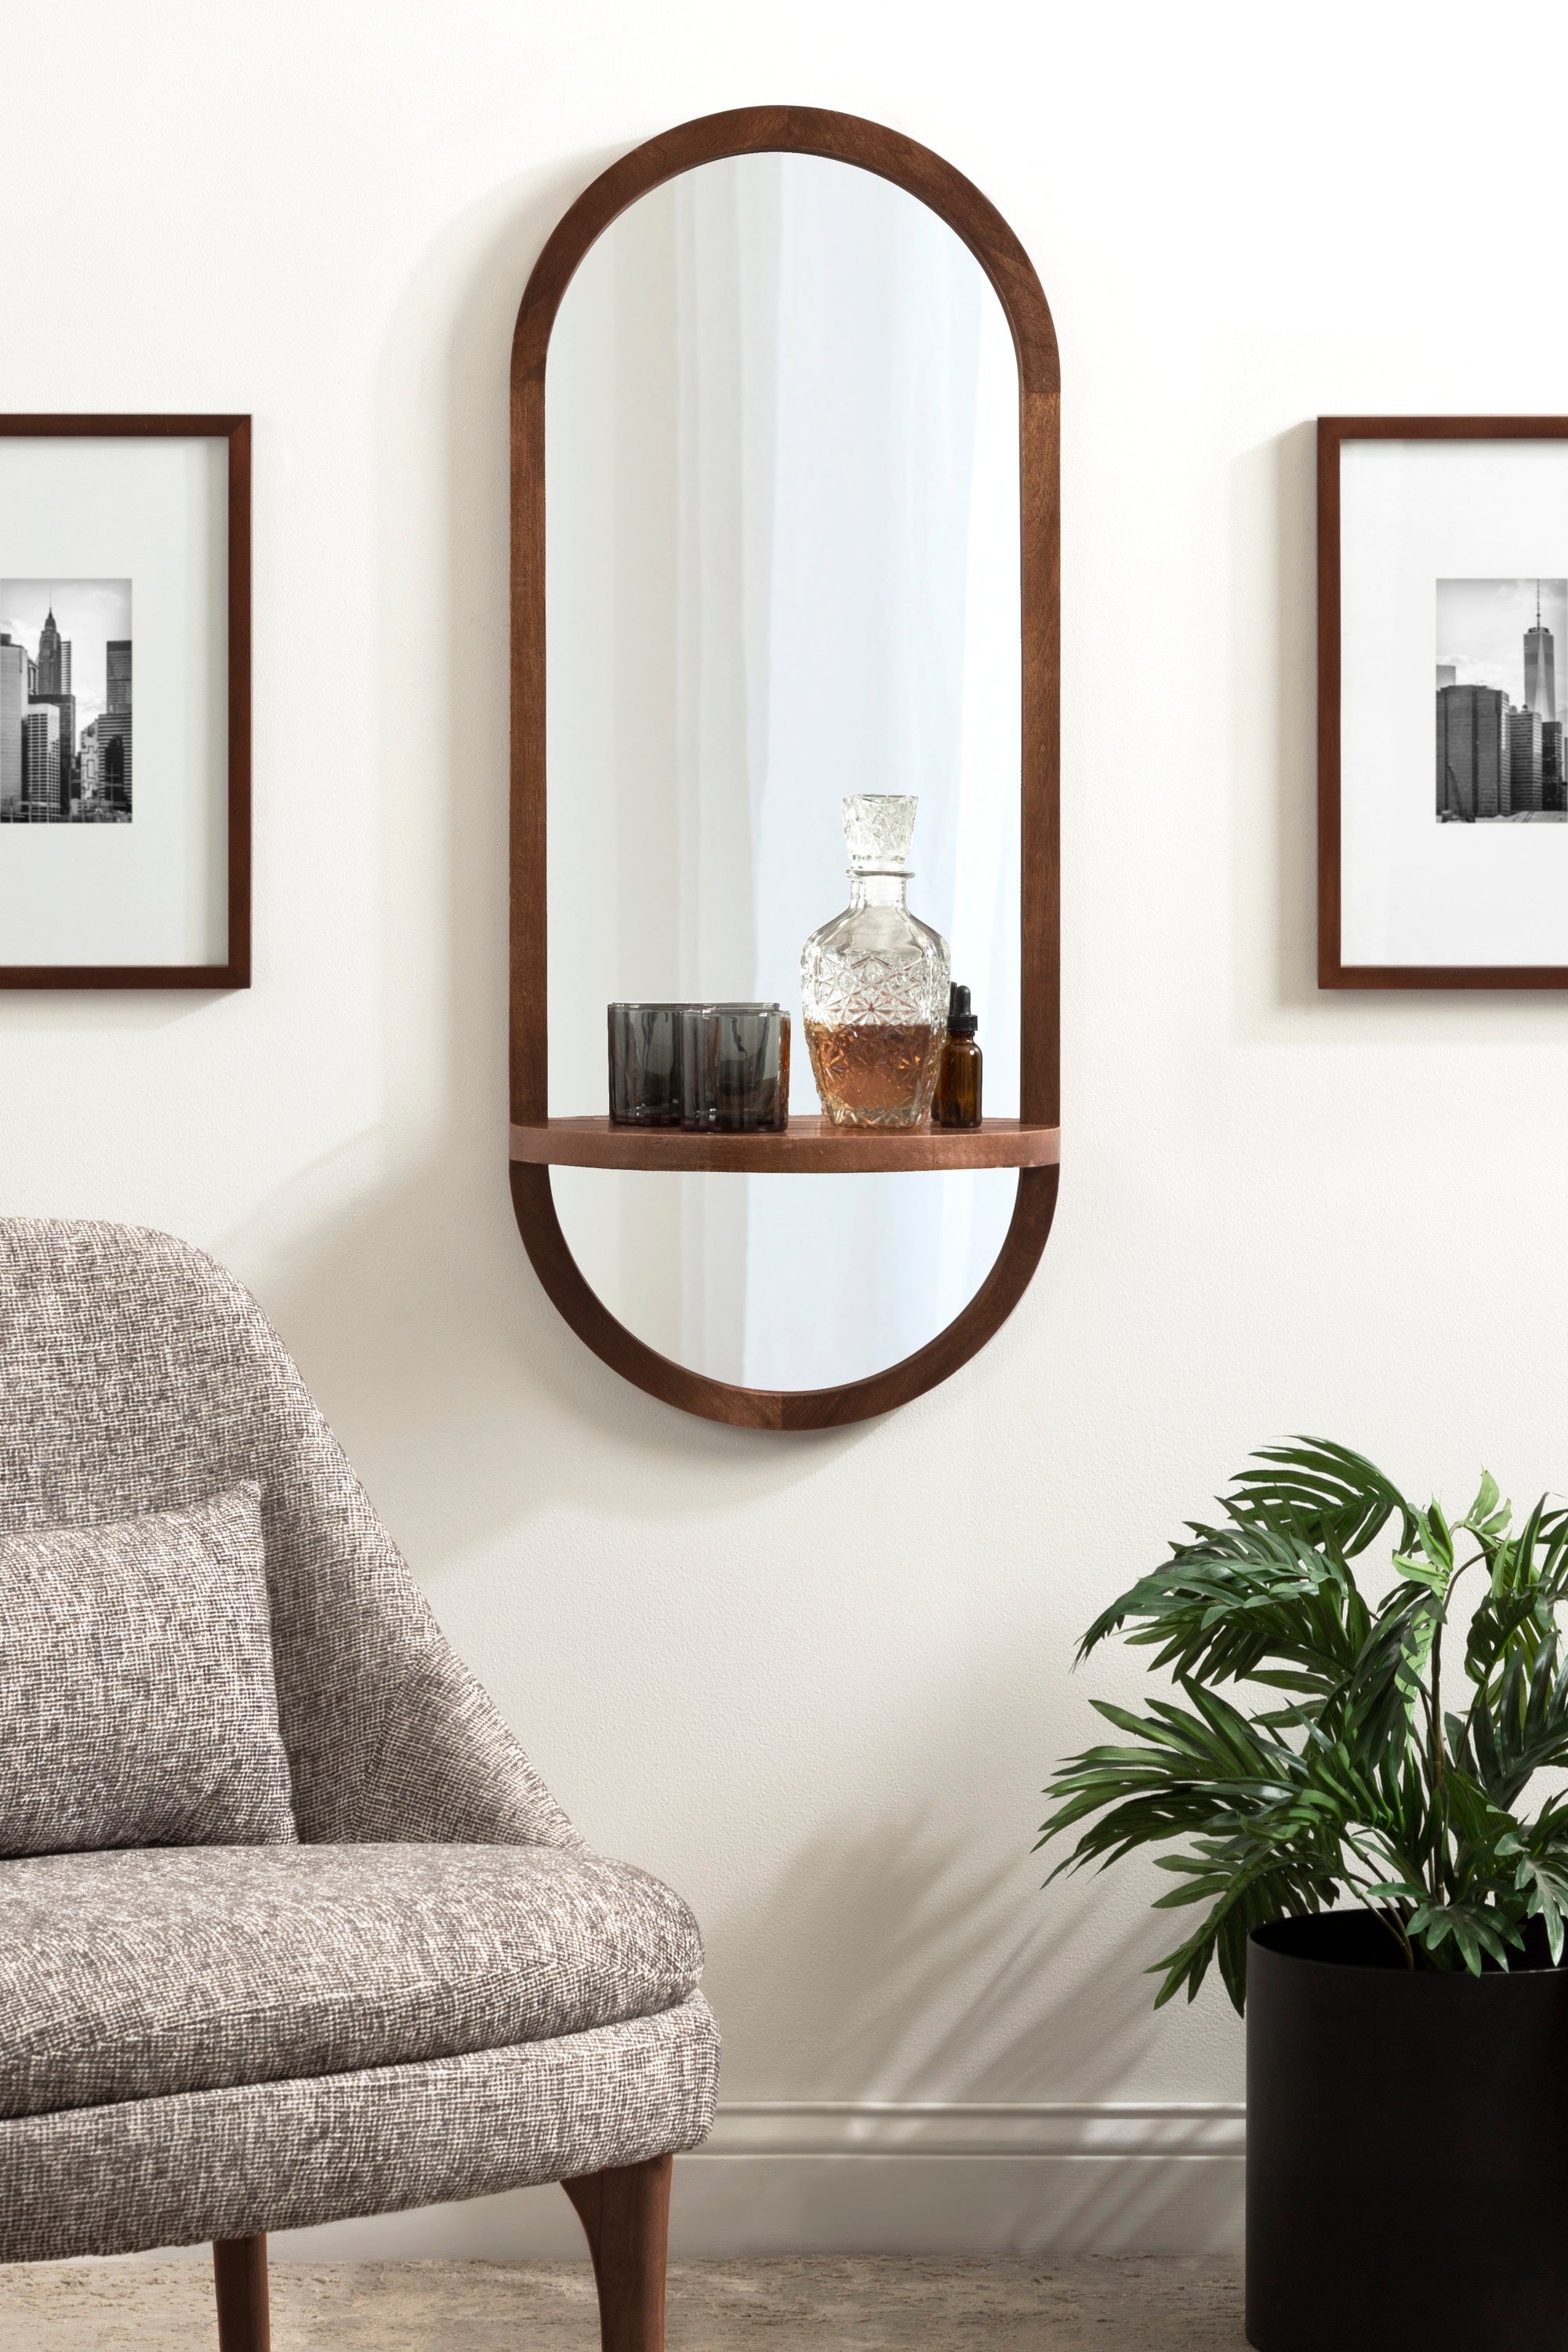 Hutton Wood Framed Capsule Mirror with Shelf